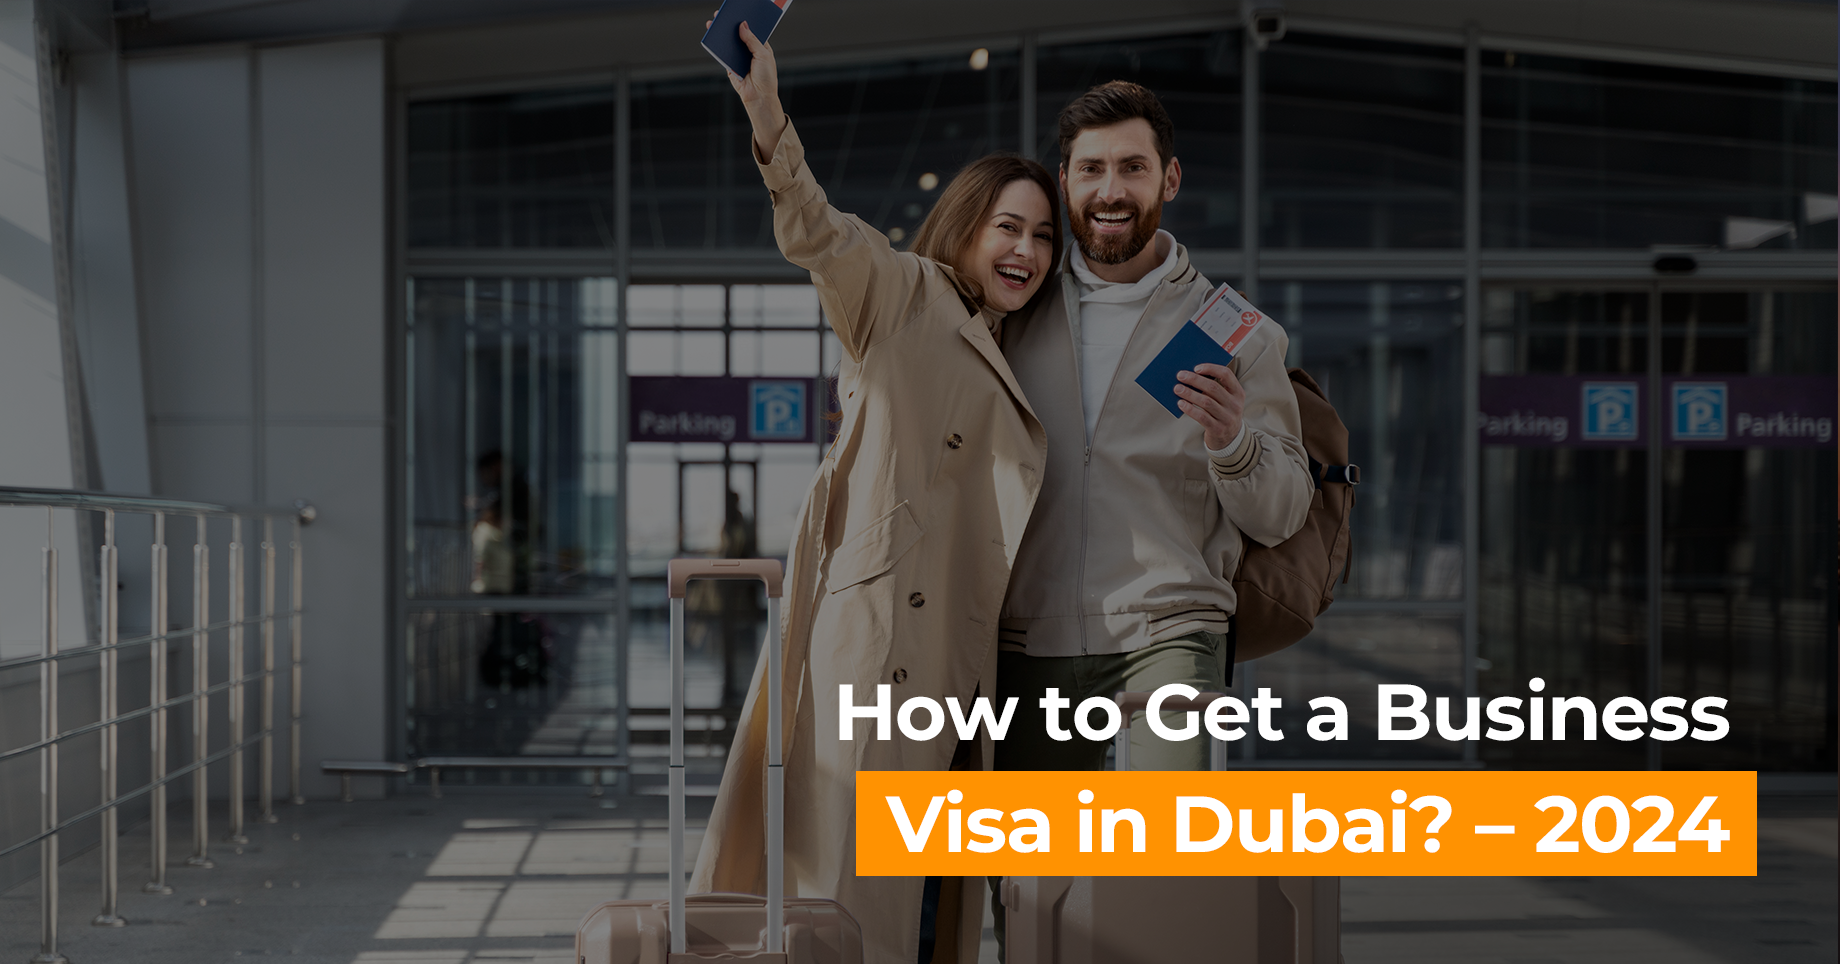 How to Get a Business Visa in Dubai? – 2024